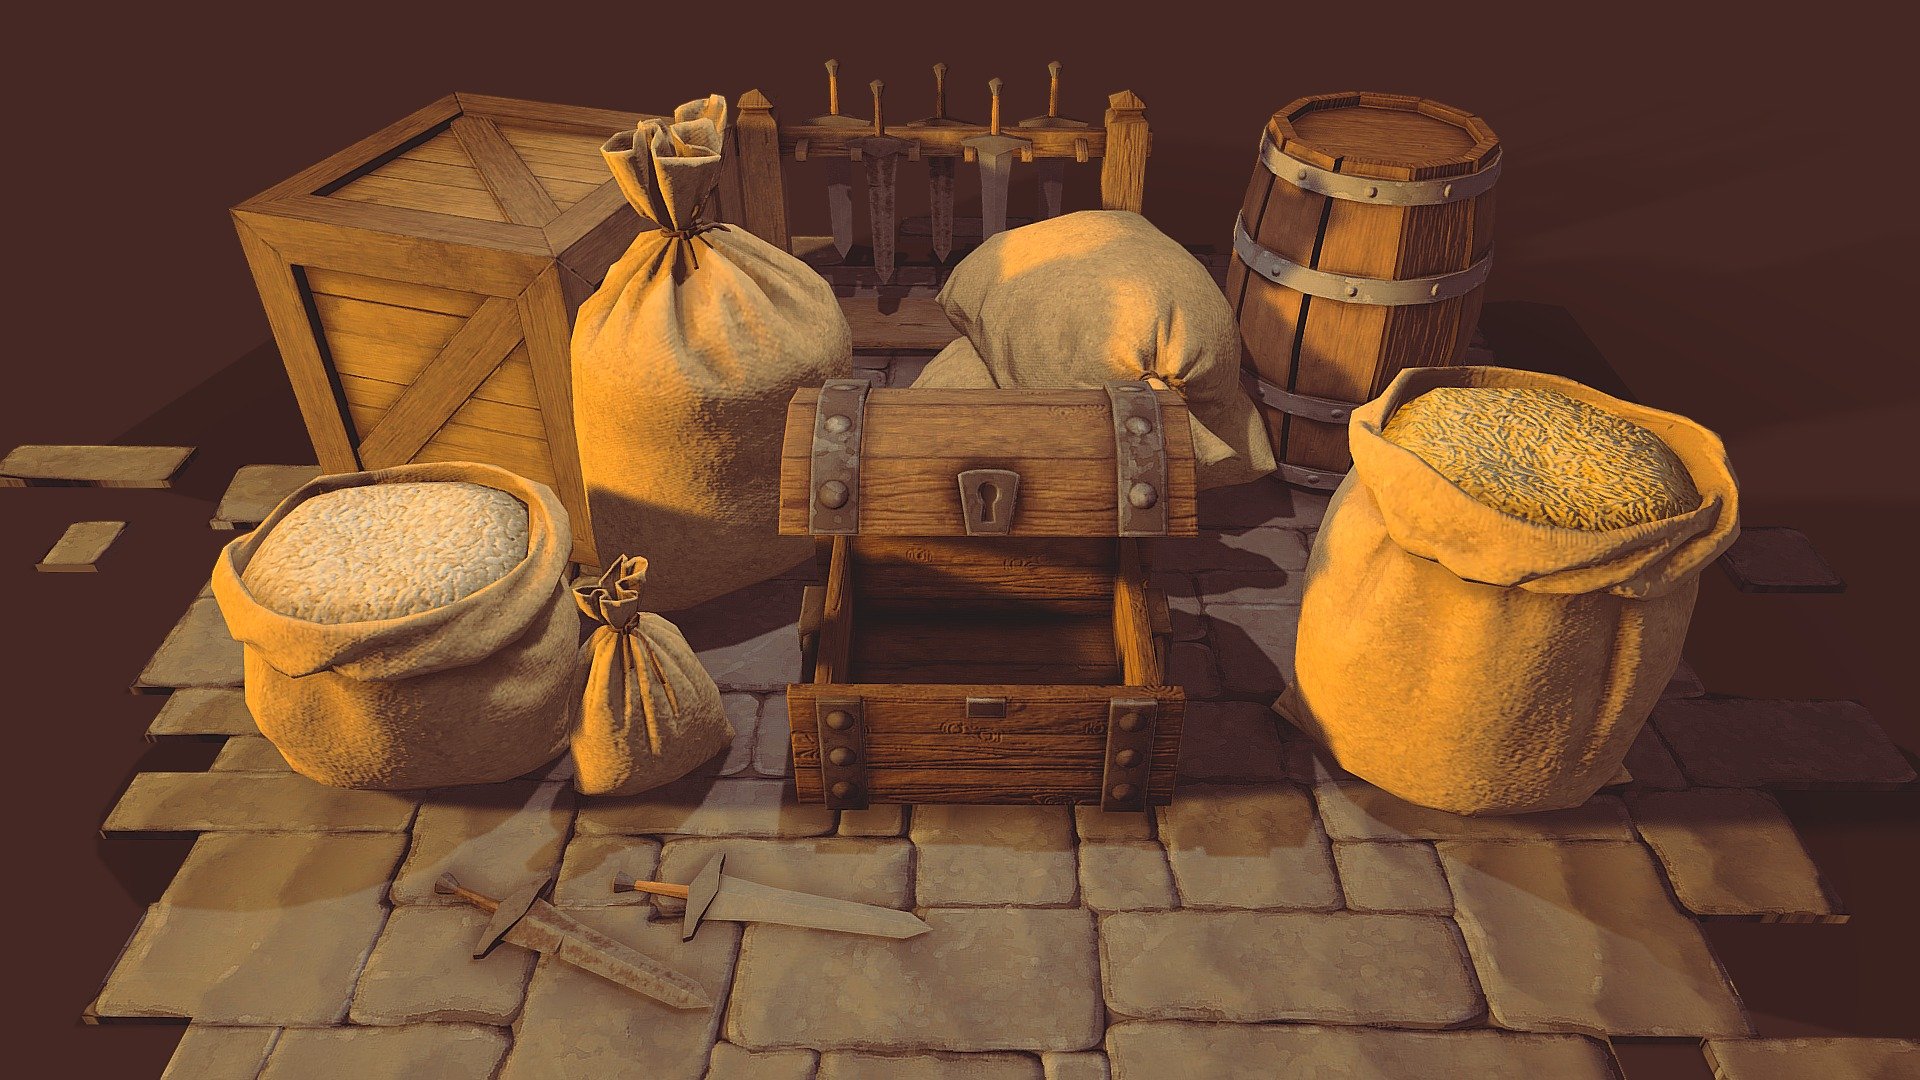 A typical scene inspired by old RPG fantasy games set in the Middle Ages. This is a part of a larger asset that includes many medieval themed items.

Centered at origin in real world scale. Clean UVs, fully unwrapped, No overlaps. Materials and textures 1024 Pixel.

Enjoy the models, and leave a feedback, please.

Content:

6 Burlap Saks, 1 barrel, 1 wooden case, 1 chest, 1 weapons rack, 2 swords.

Collection:

Modular Wood Construction: https://skfb.ly/oLWtK

Medieval Laid Table: https://skfb.ly/oLWtS

Medieval Bookcases: https://skfb.ly/oLY9K

Medieval Burlap Sacks and other: https://skfb.ly/oMRoF - Medieval Burlap Sacks and other (Asset) - Buy Royalty Free 3D model by Domenico Bianco - Pizza&Games (@pizzaandgames) 3d model